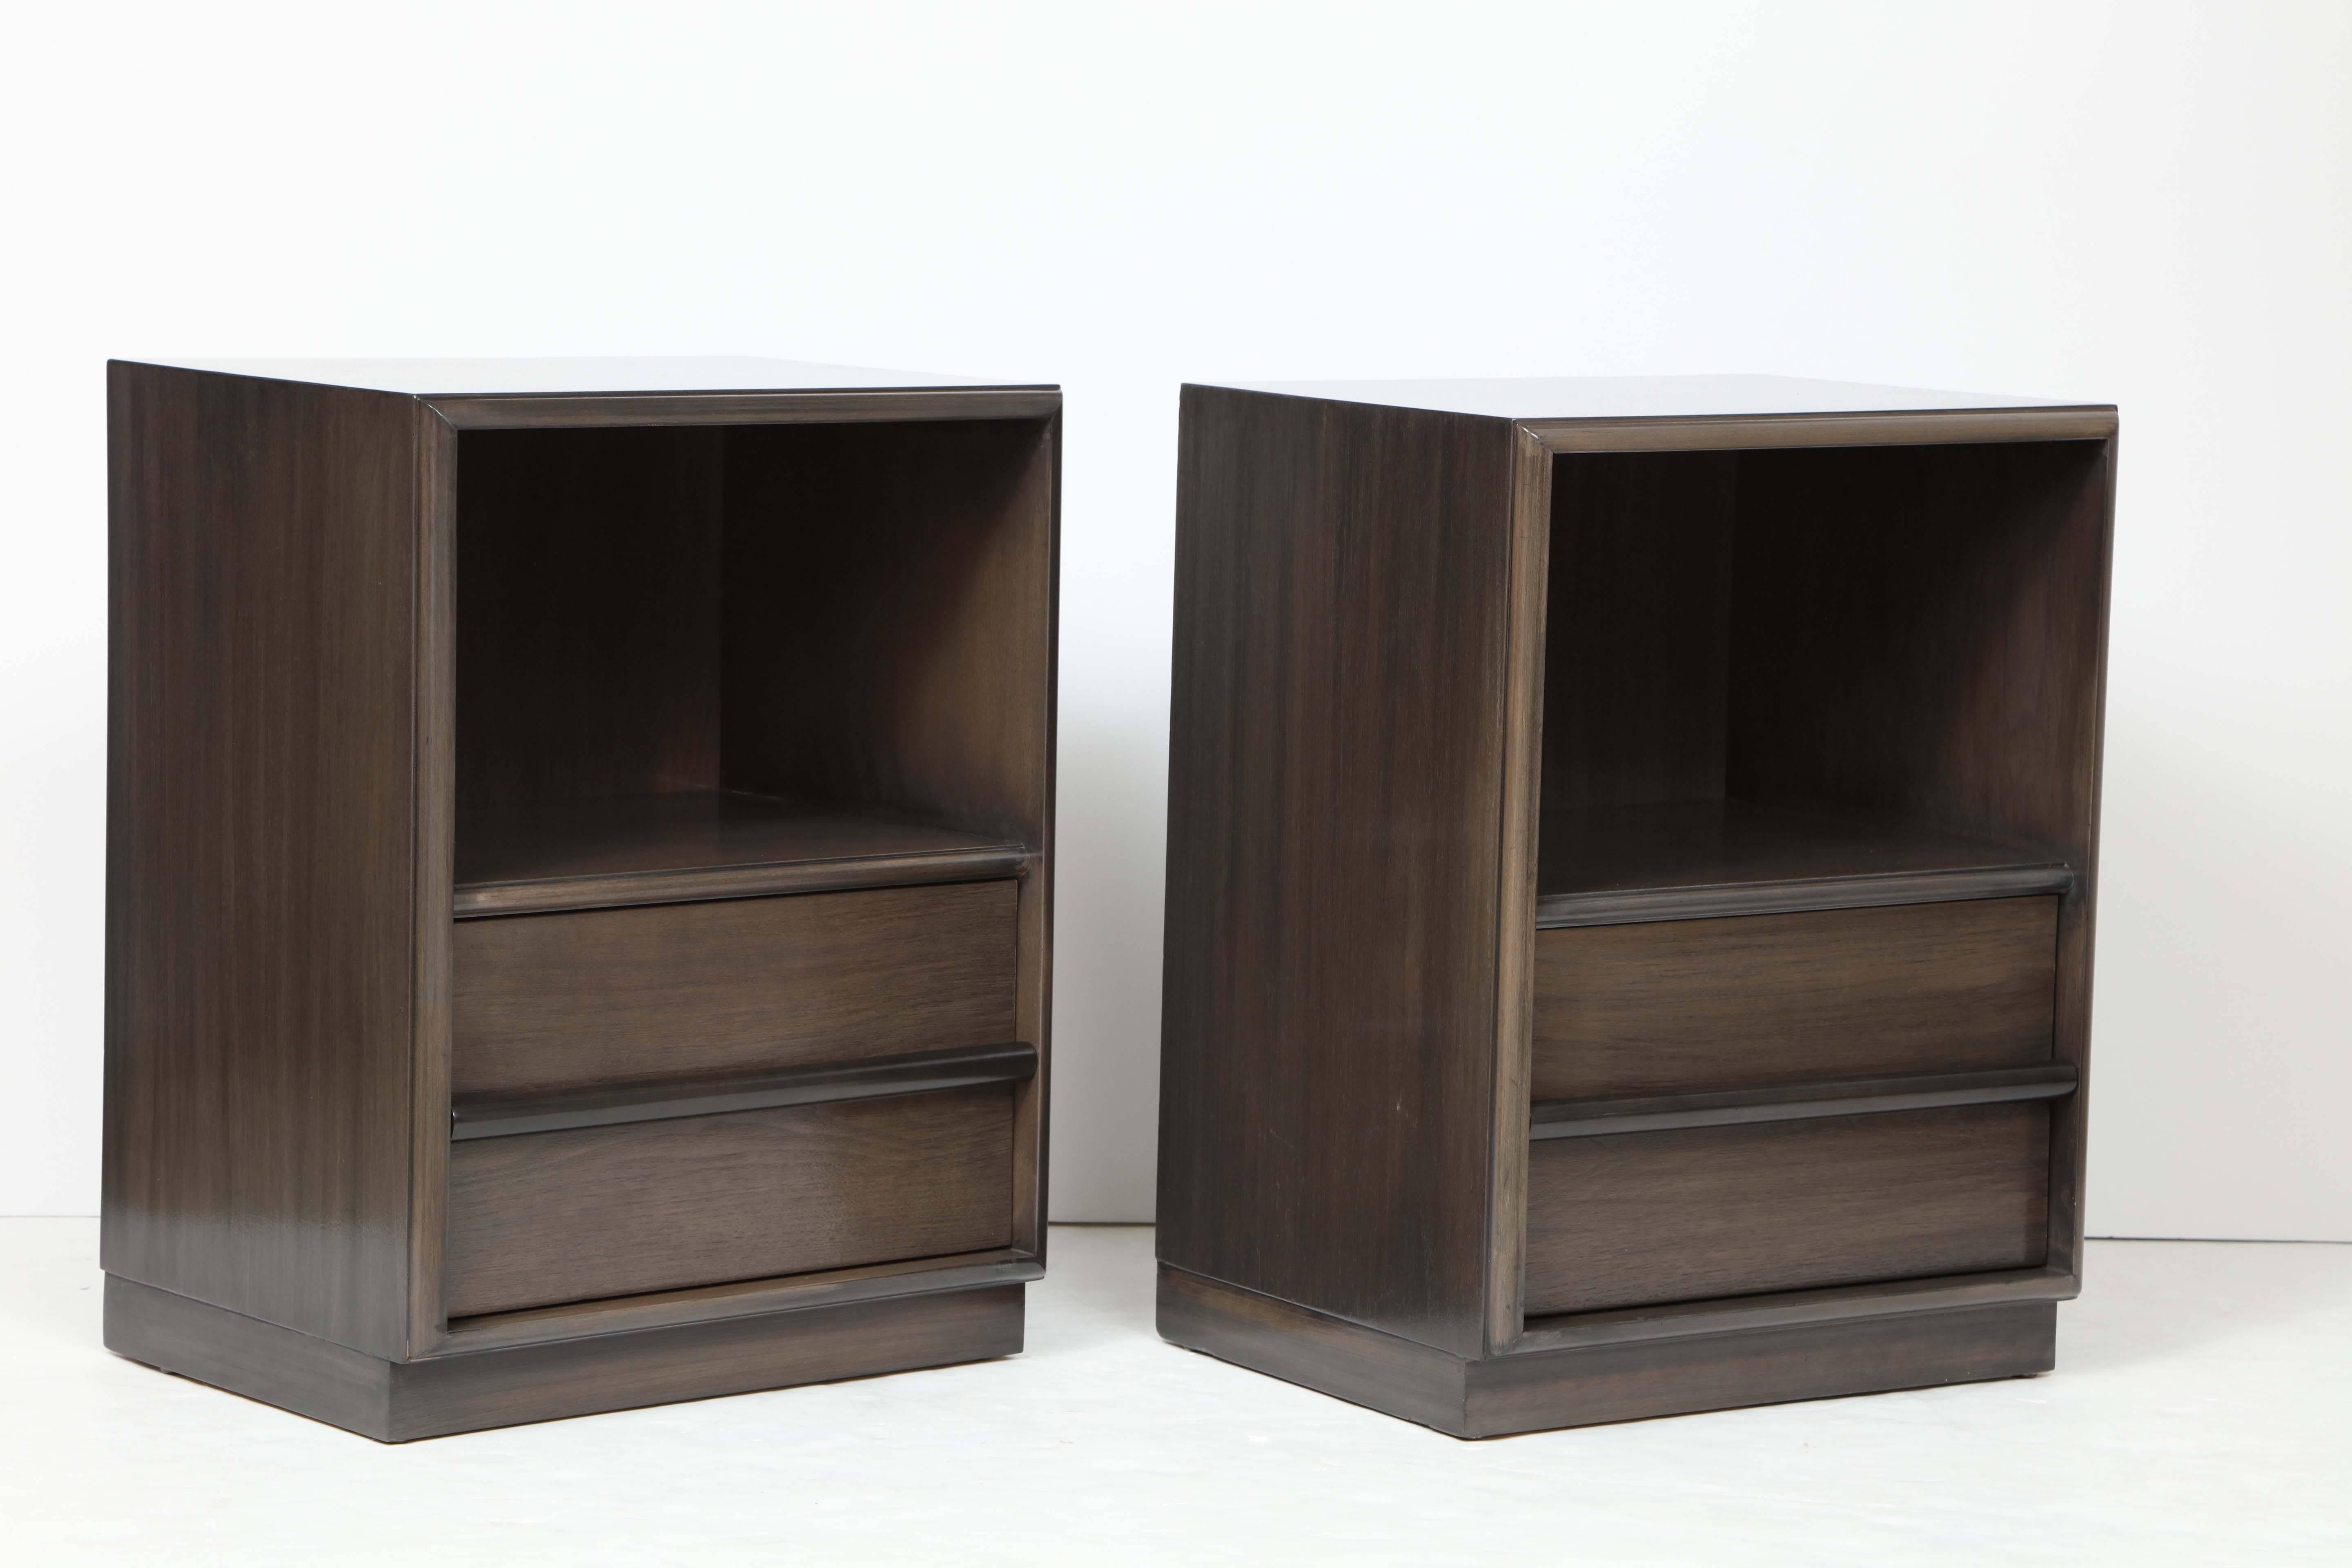 Pair of mint restored Modernist nightstands in a custom Mink grey/brown drift wood finish. Upper compartment, lower pull out drawer.
Designed by T. H. Robsjohn-Gibbings for Widdicomb.